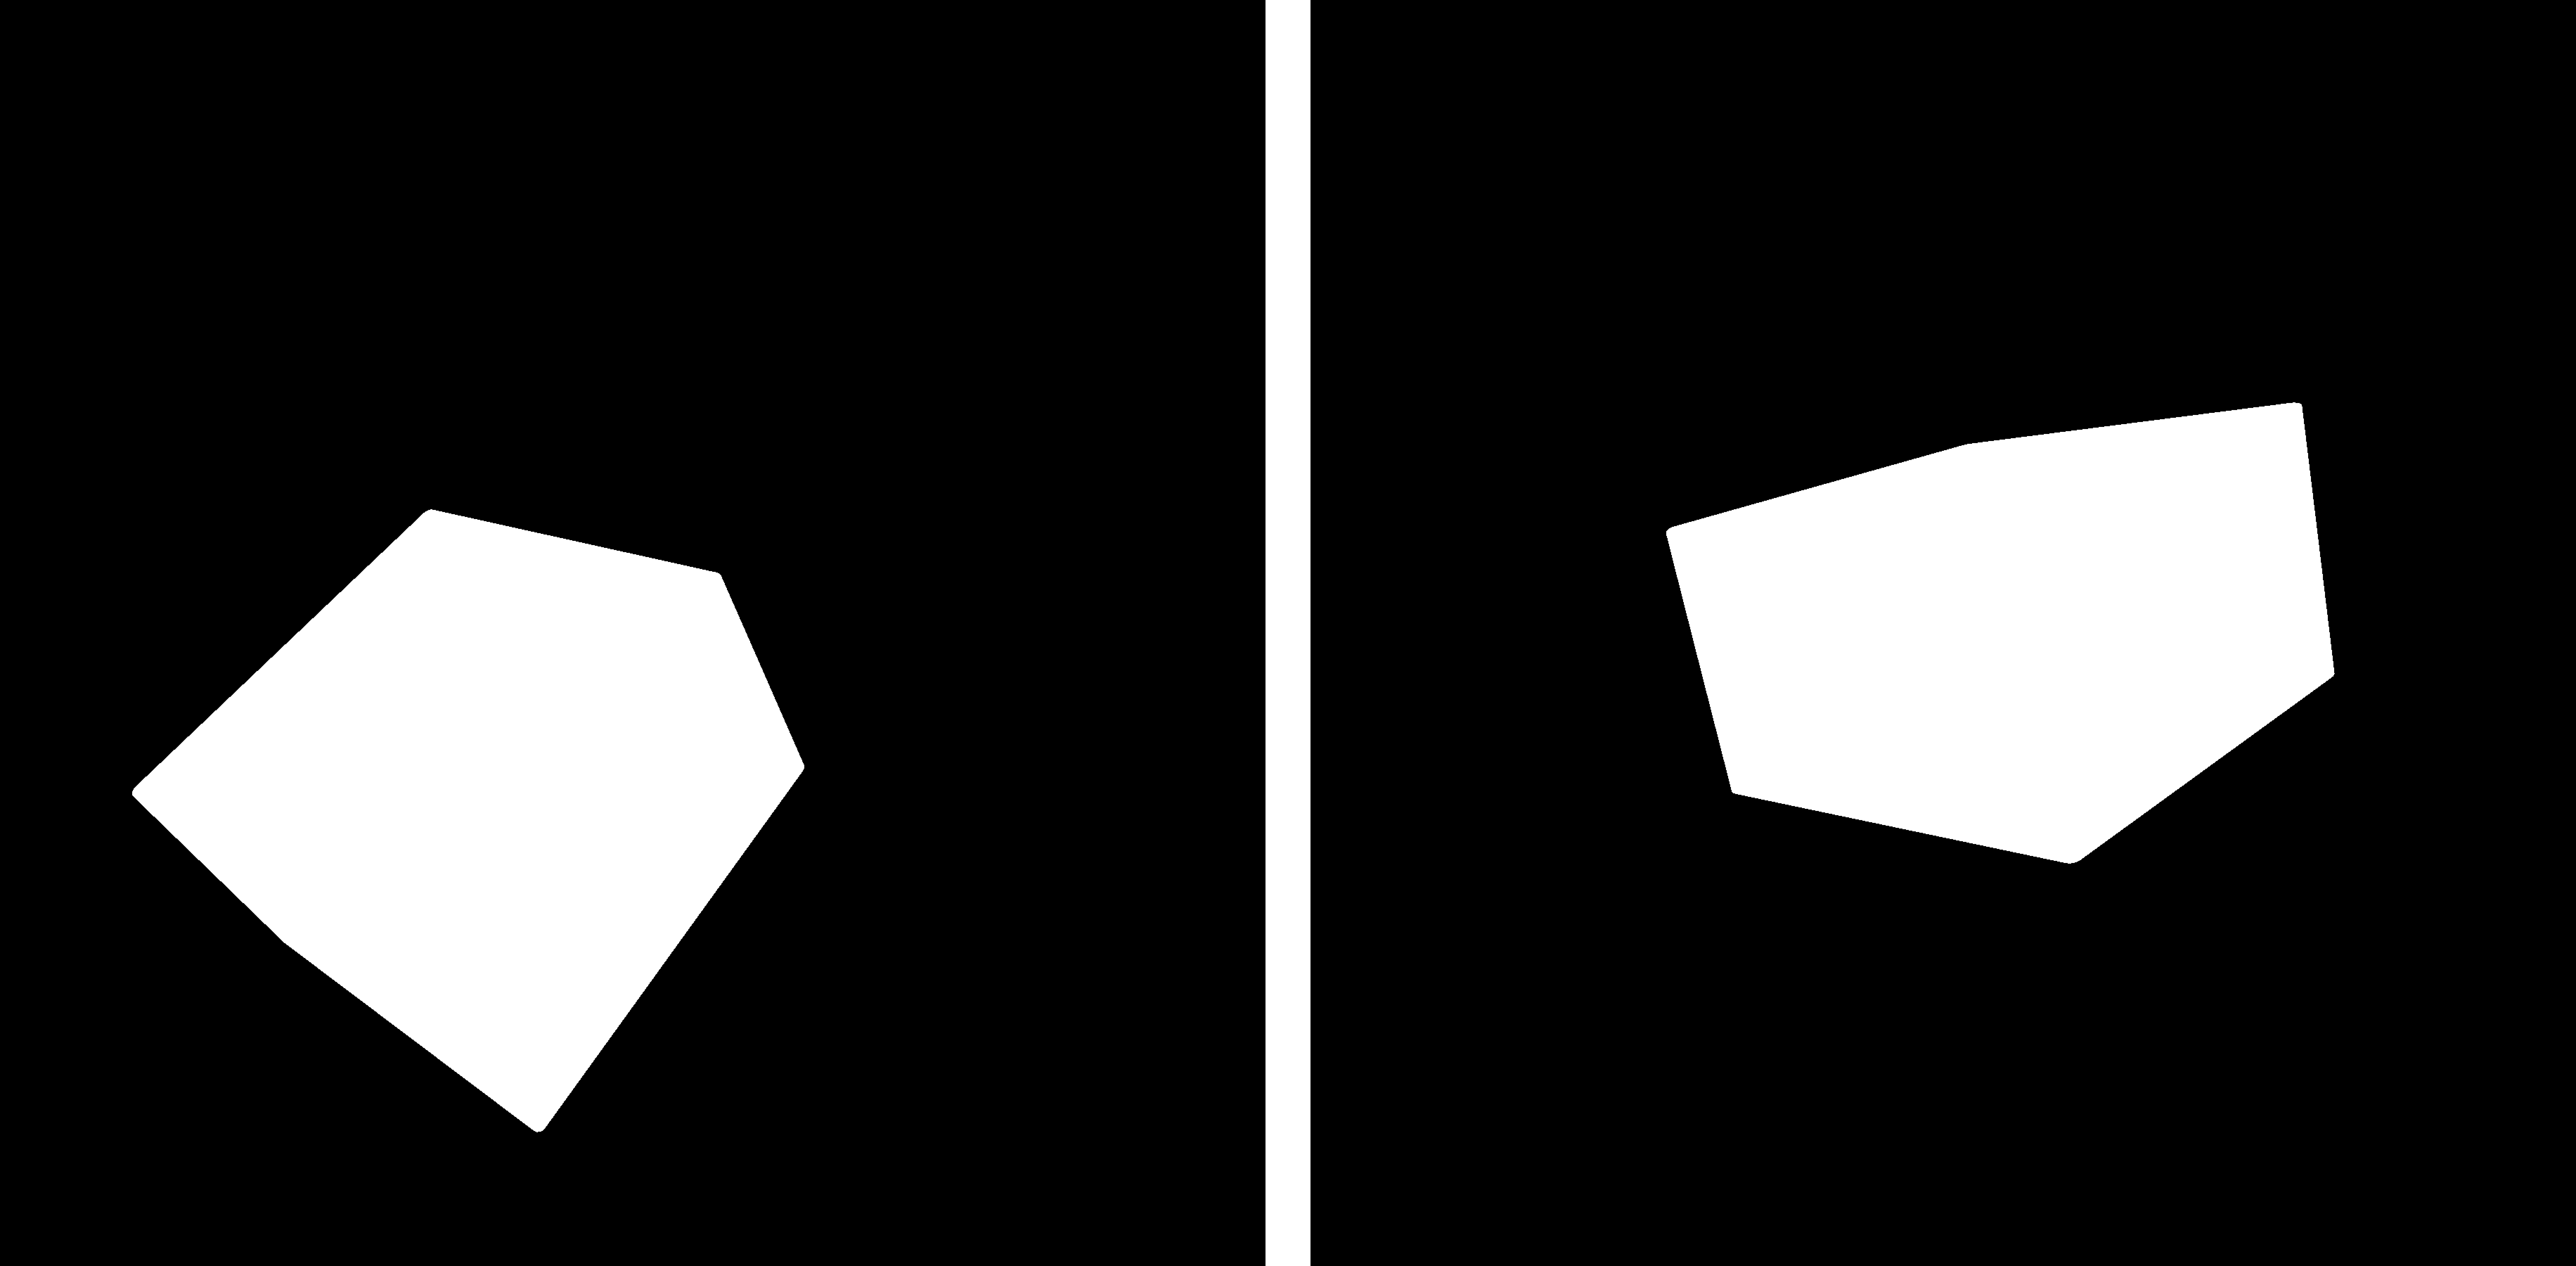 The model's output where white shapes are recognized as packages and everything else is masked in black